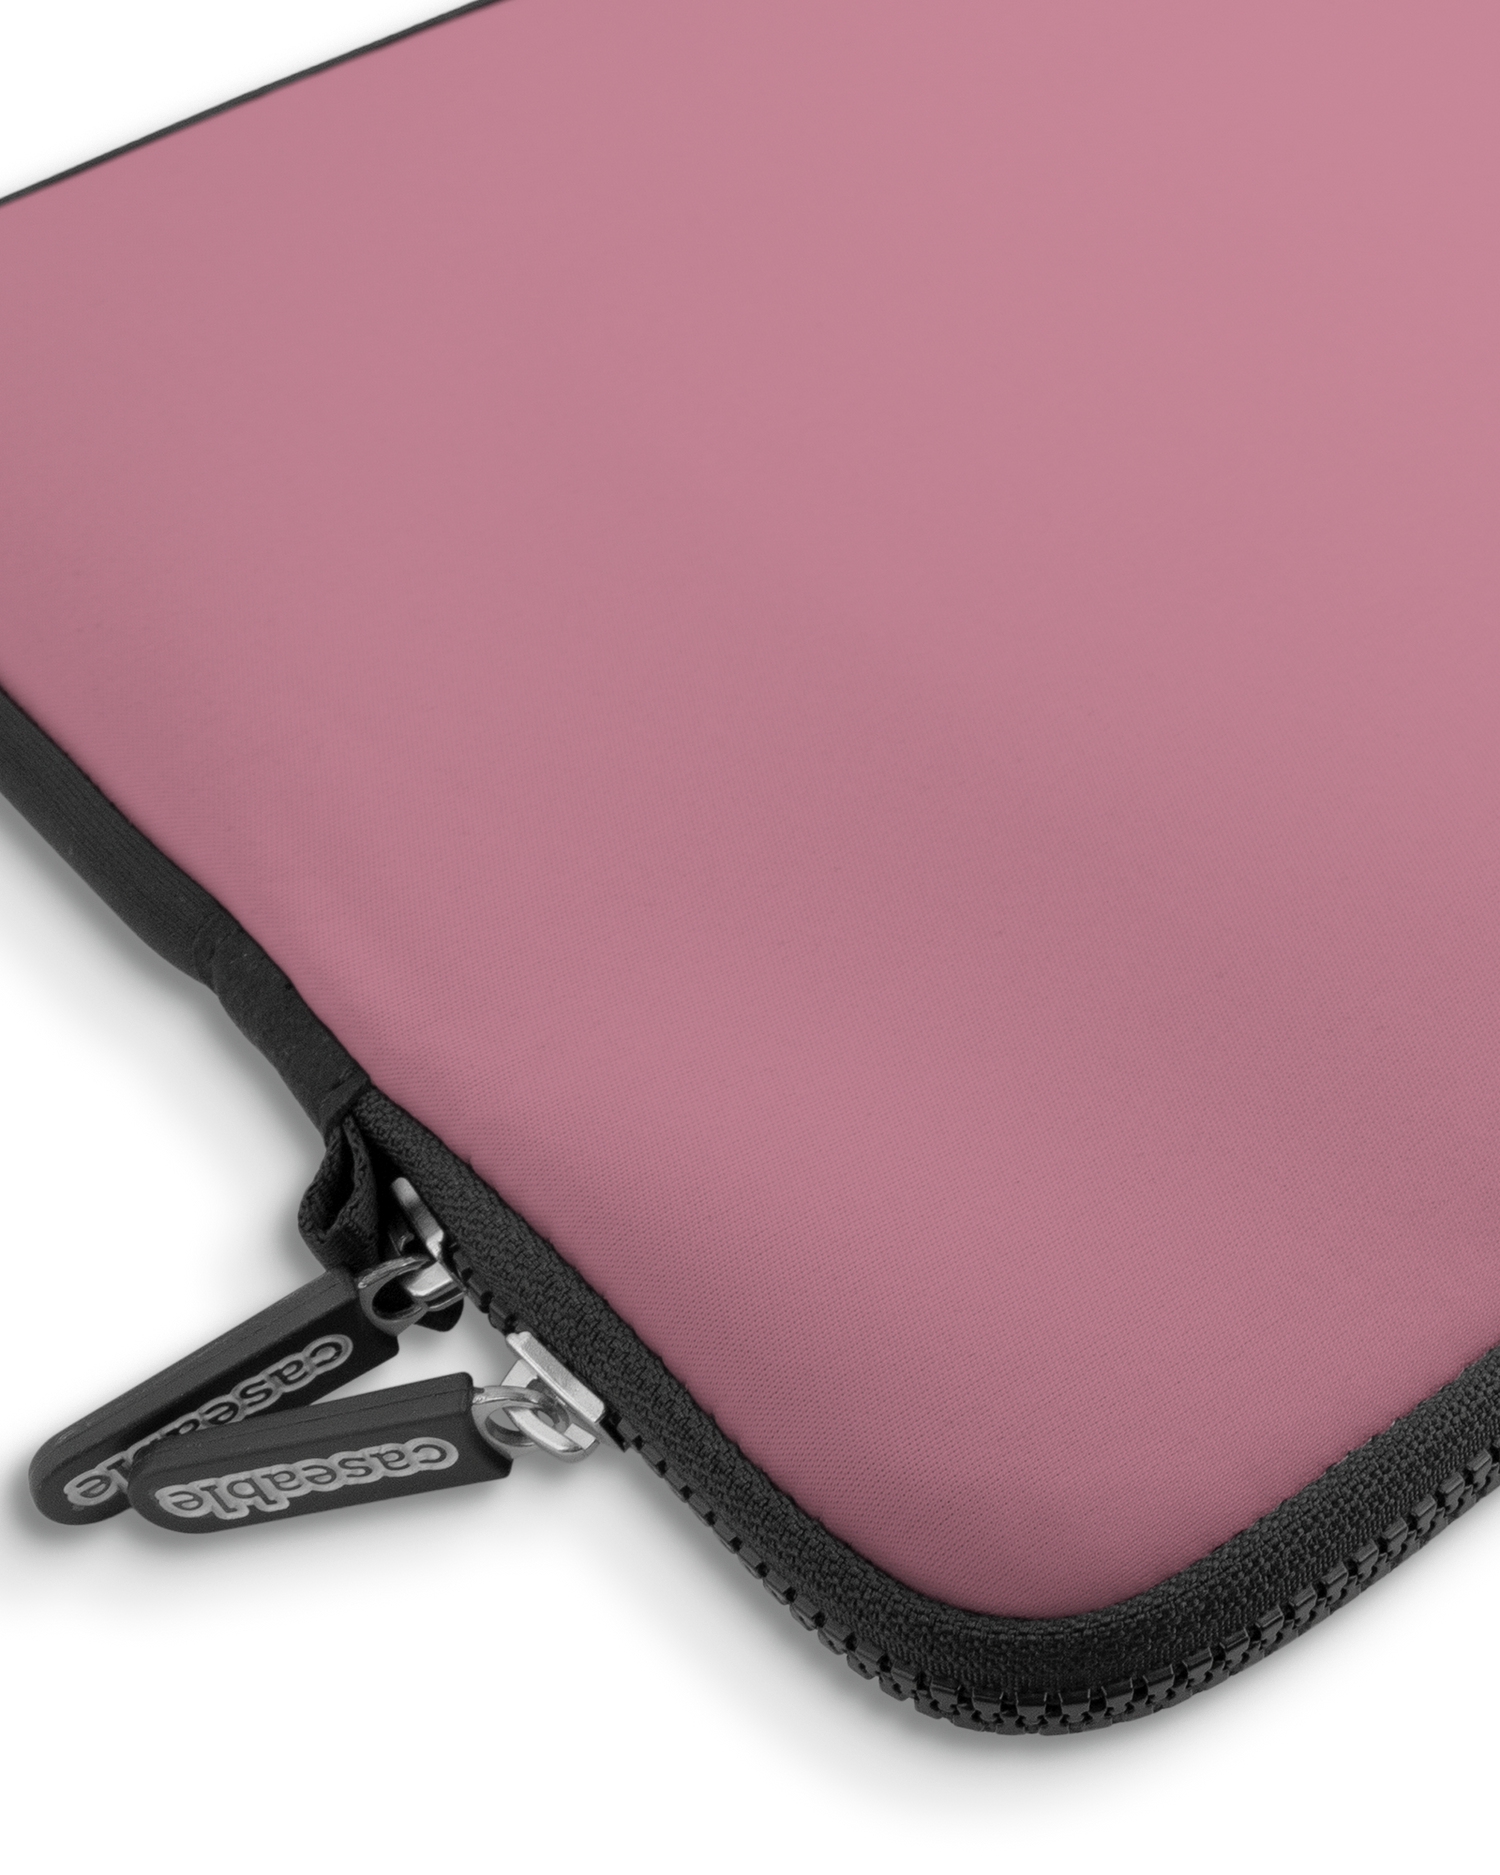 WILD ROSE Premium Laptop Bag 15 inch with device inside